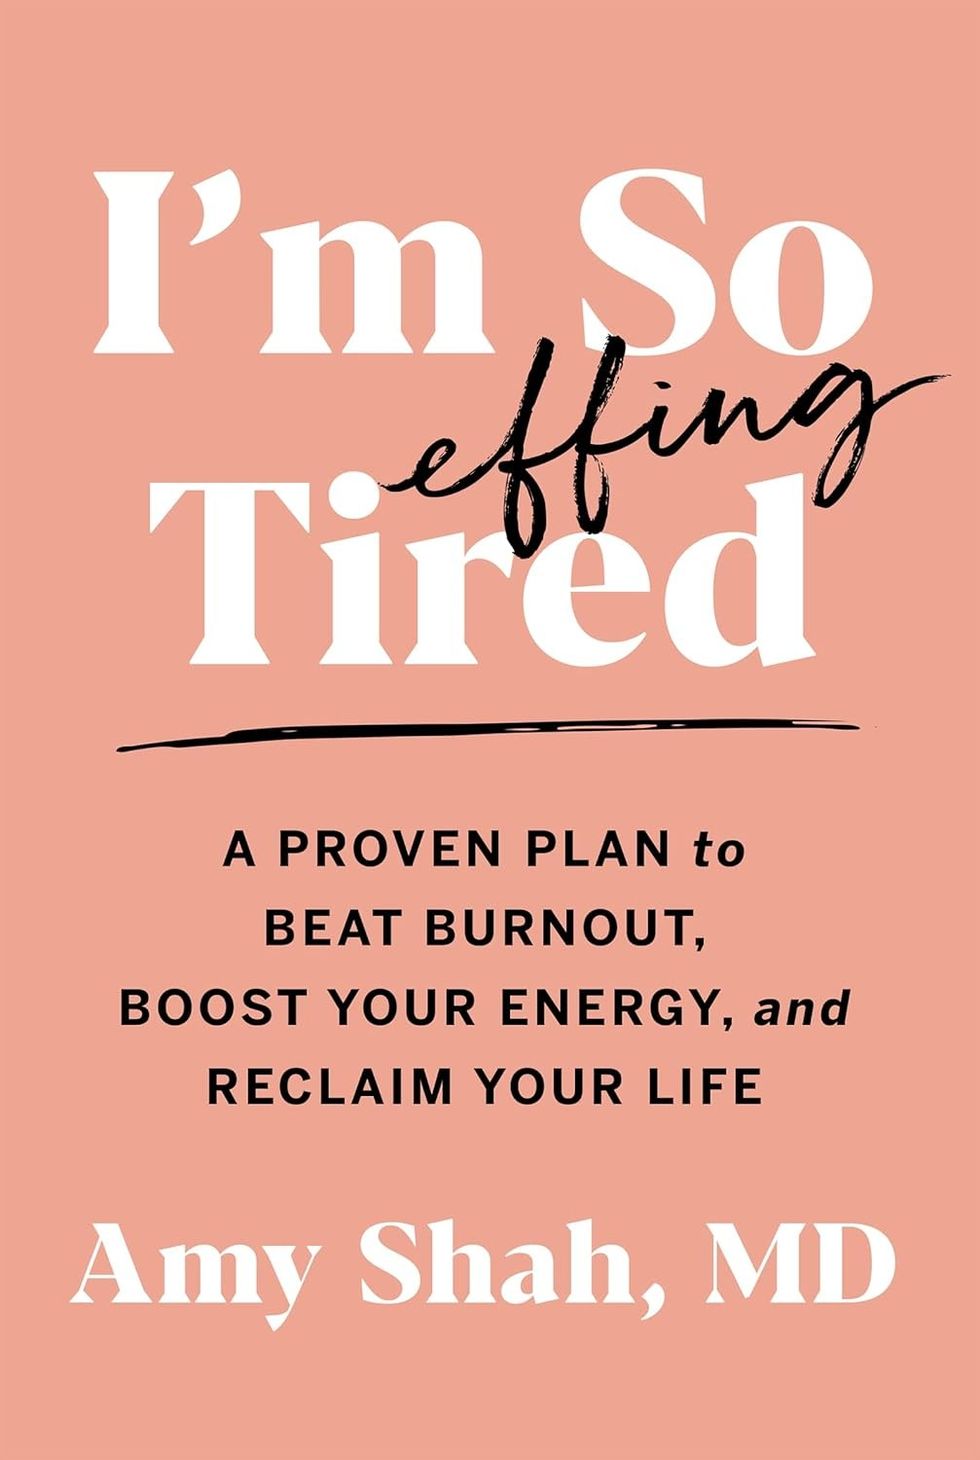 I'm So Tired: A Proven Plan to Beat Burnout, Boost Your Energy, and Reclaim Your Life by Amy Shah, MD